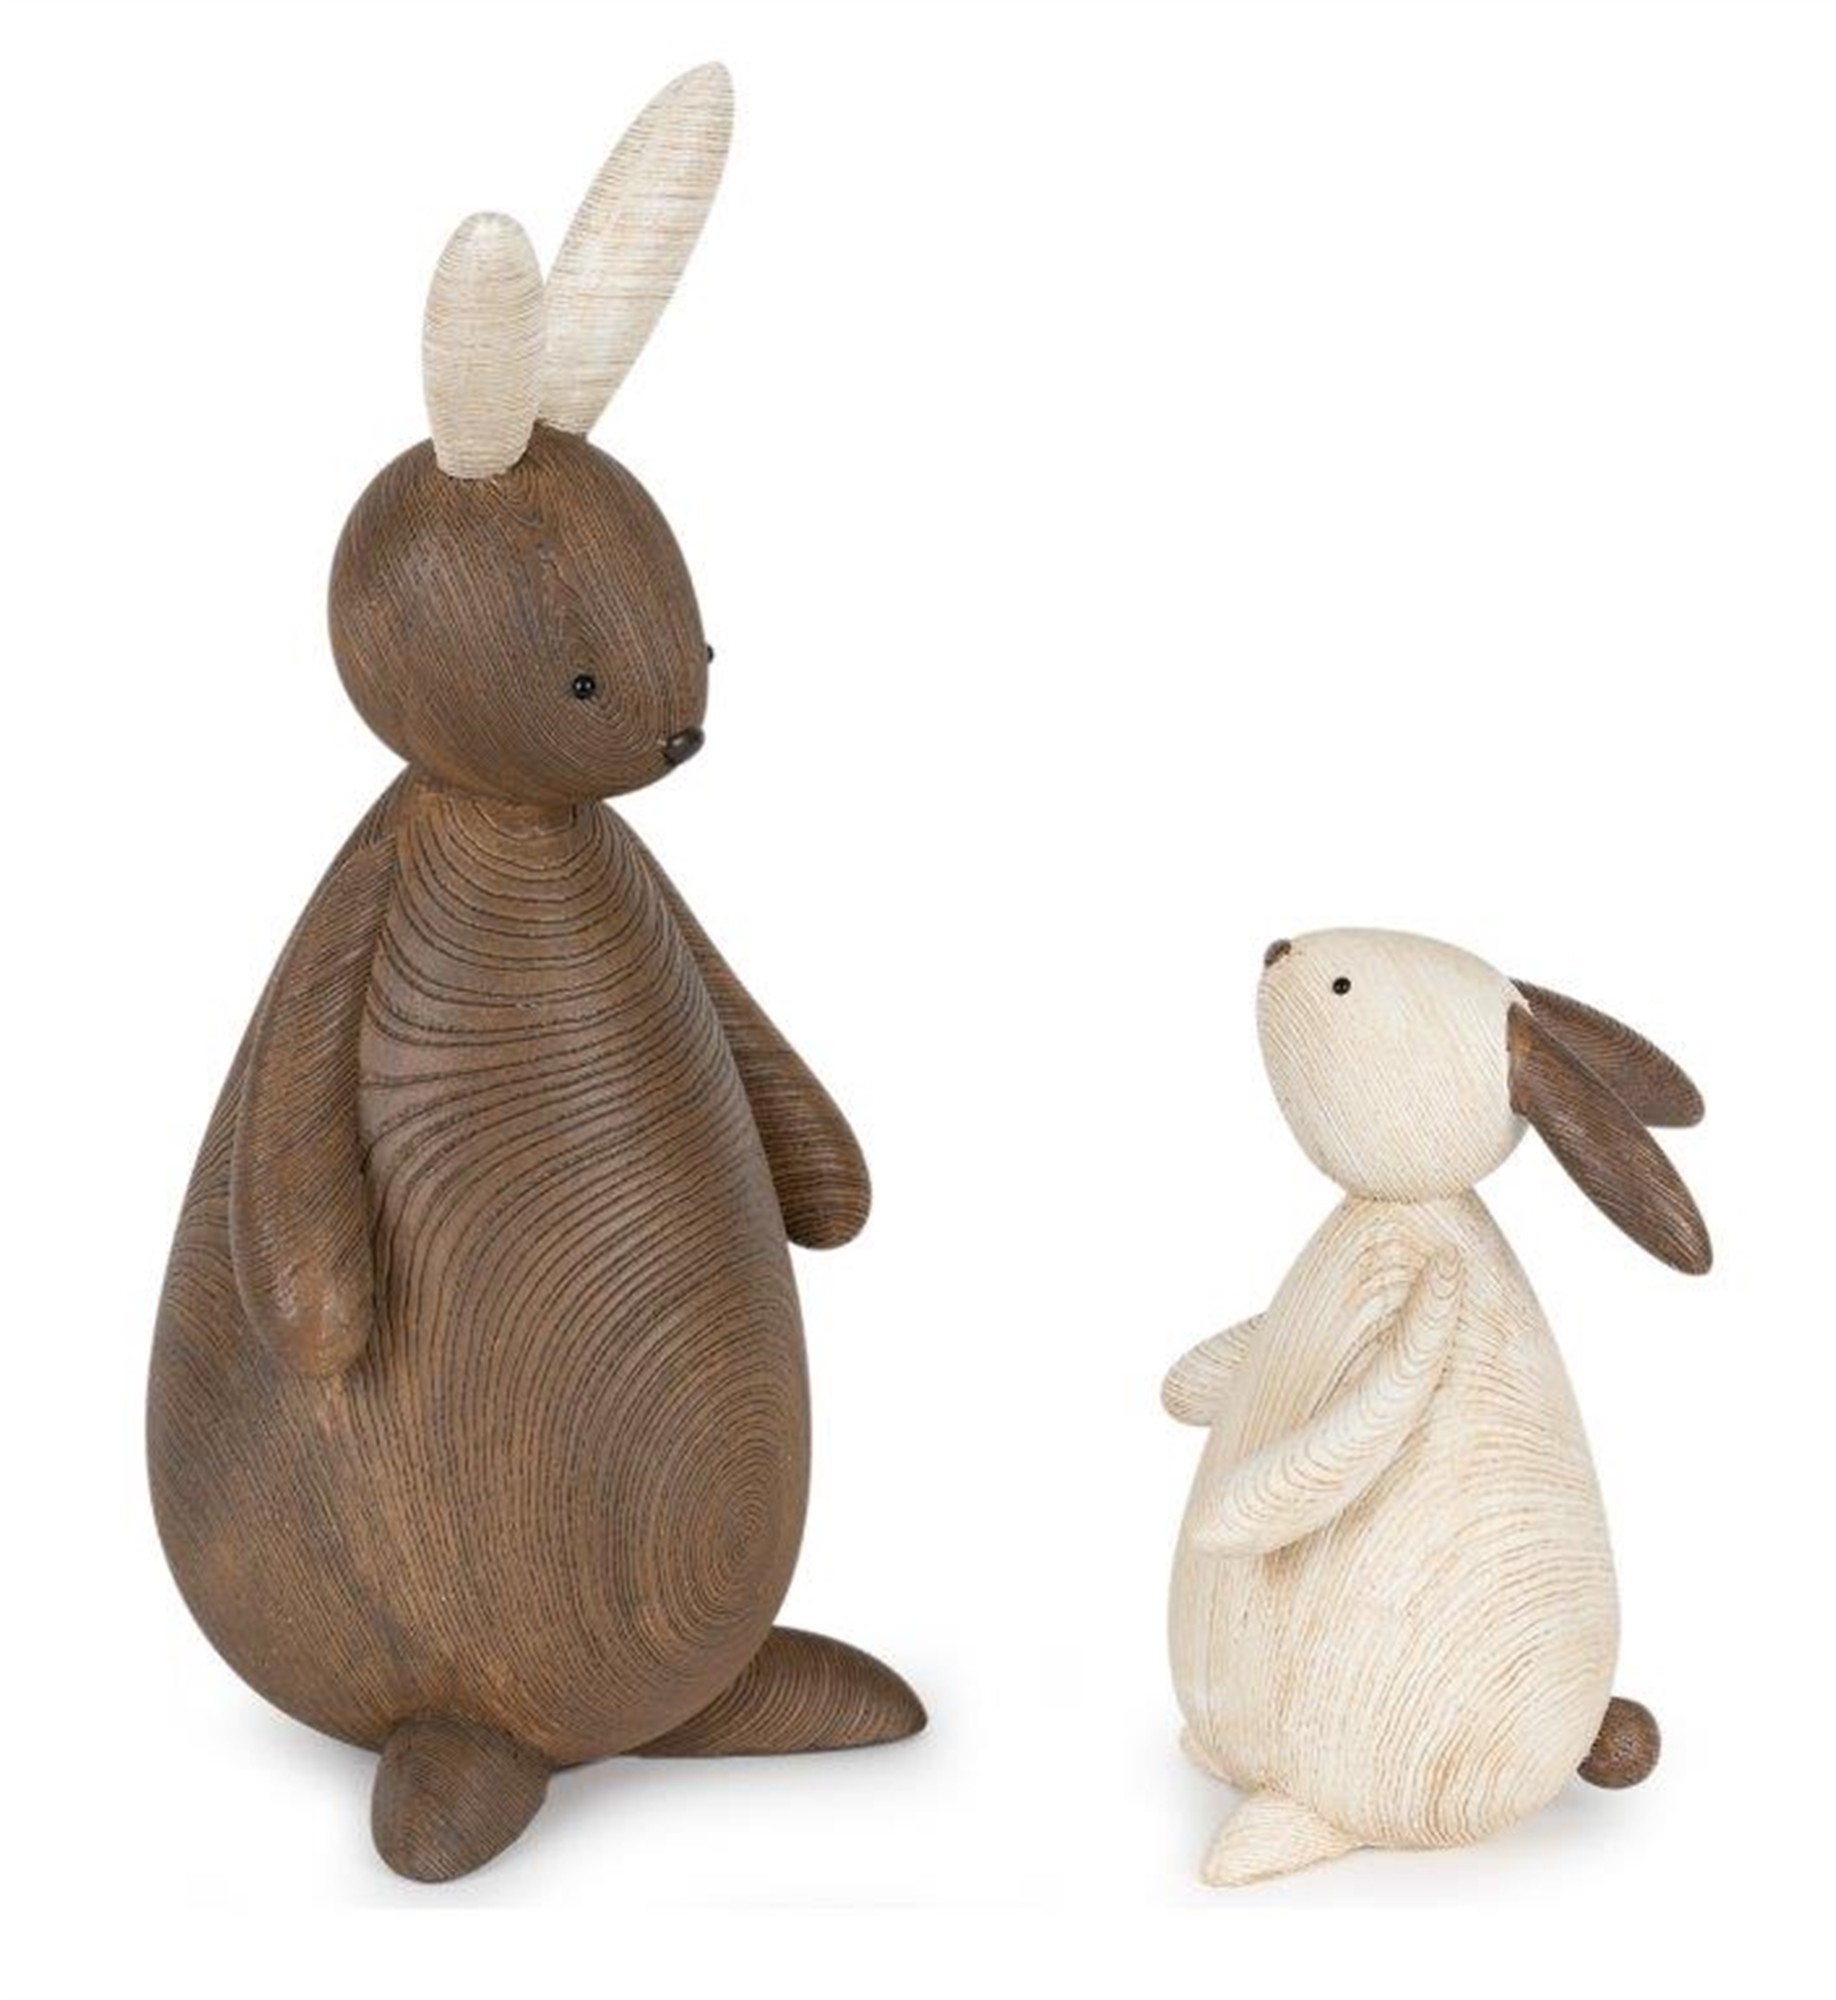 Bunny (Set of 2) 5.75"H, 10.5"H Resin